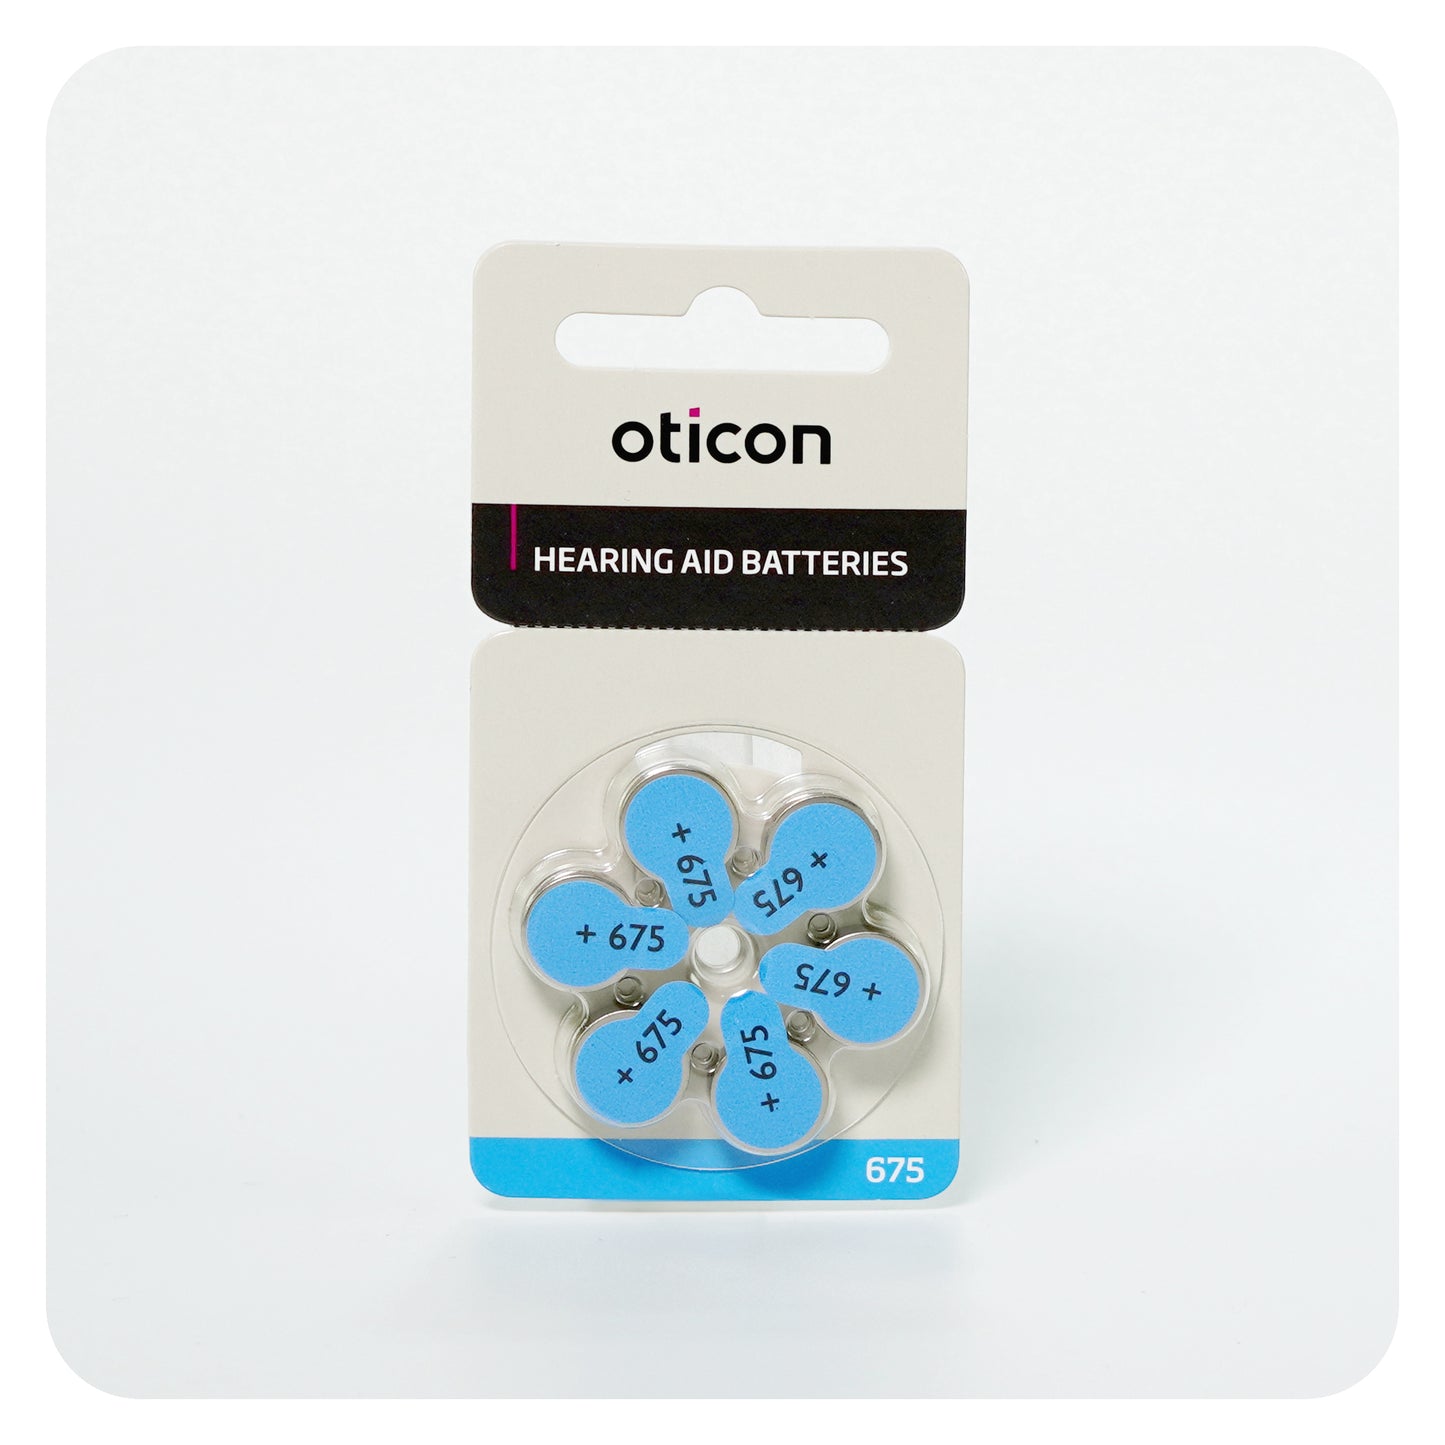 Oticon Hearing Aid Battery Pack - Size 675